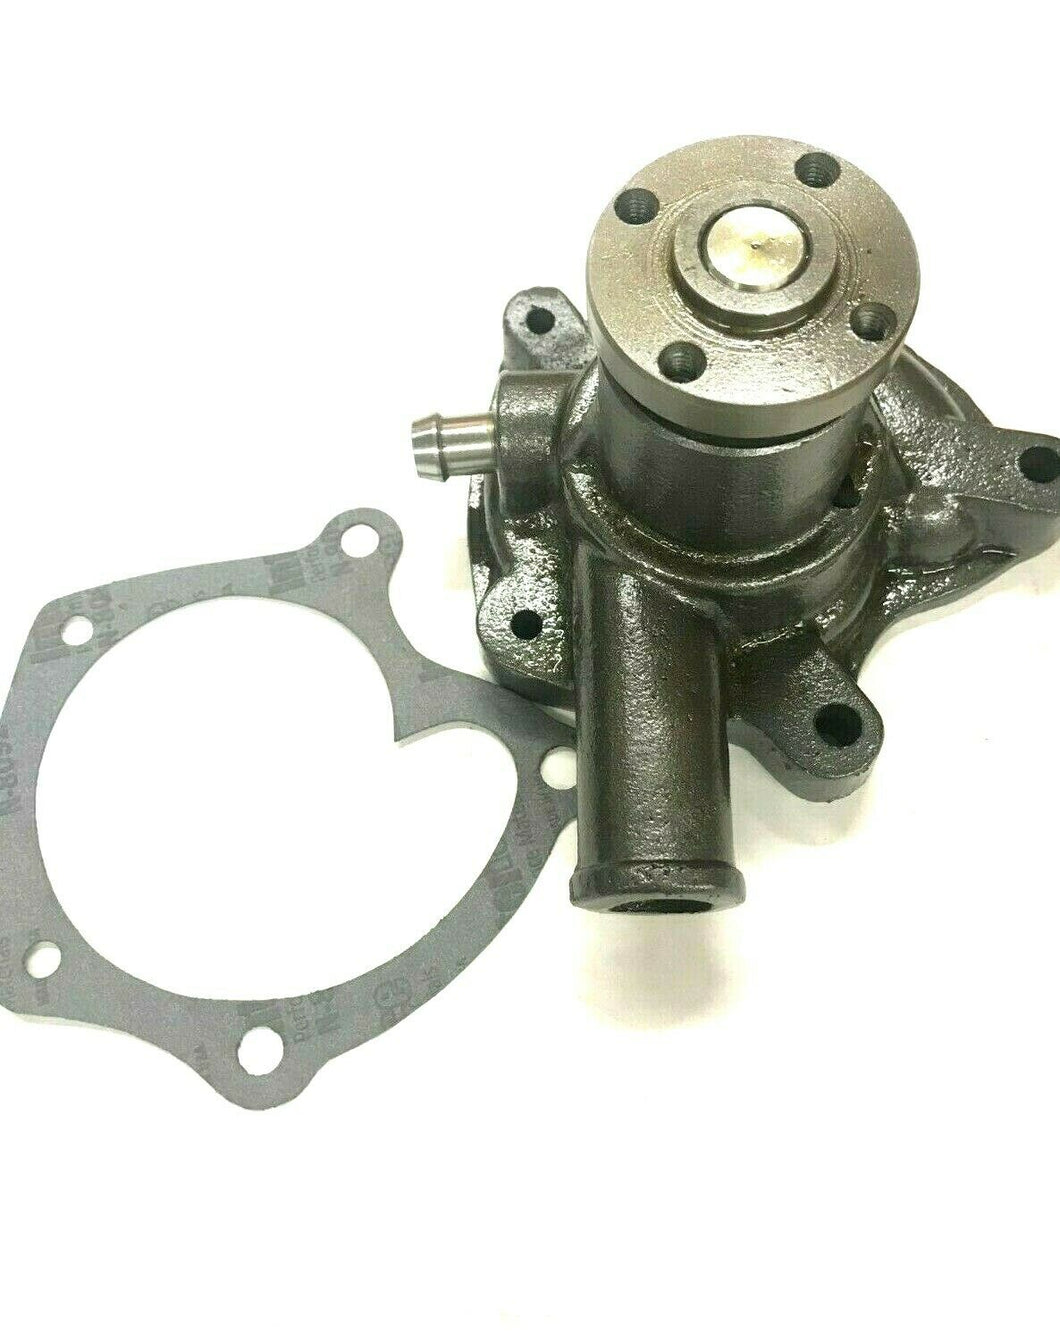 Water Pump - Allis Chalmers , Fits Tractor Models 5125, 5220 - Replaces 72103891